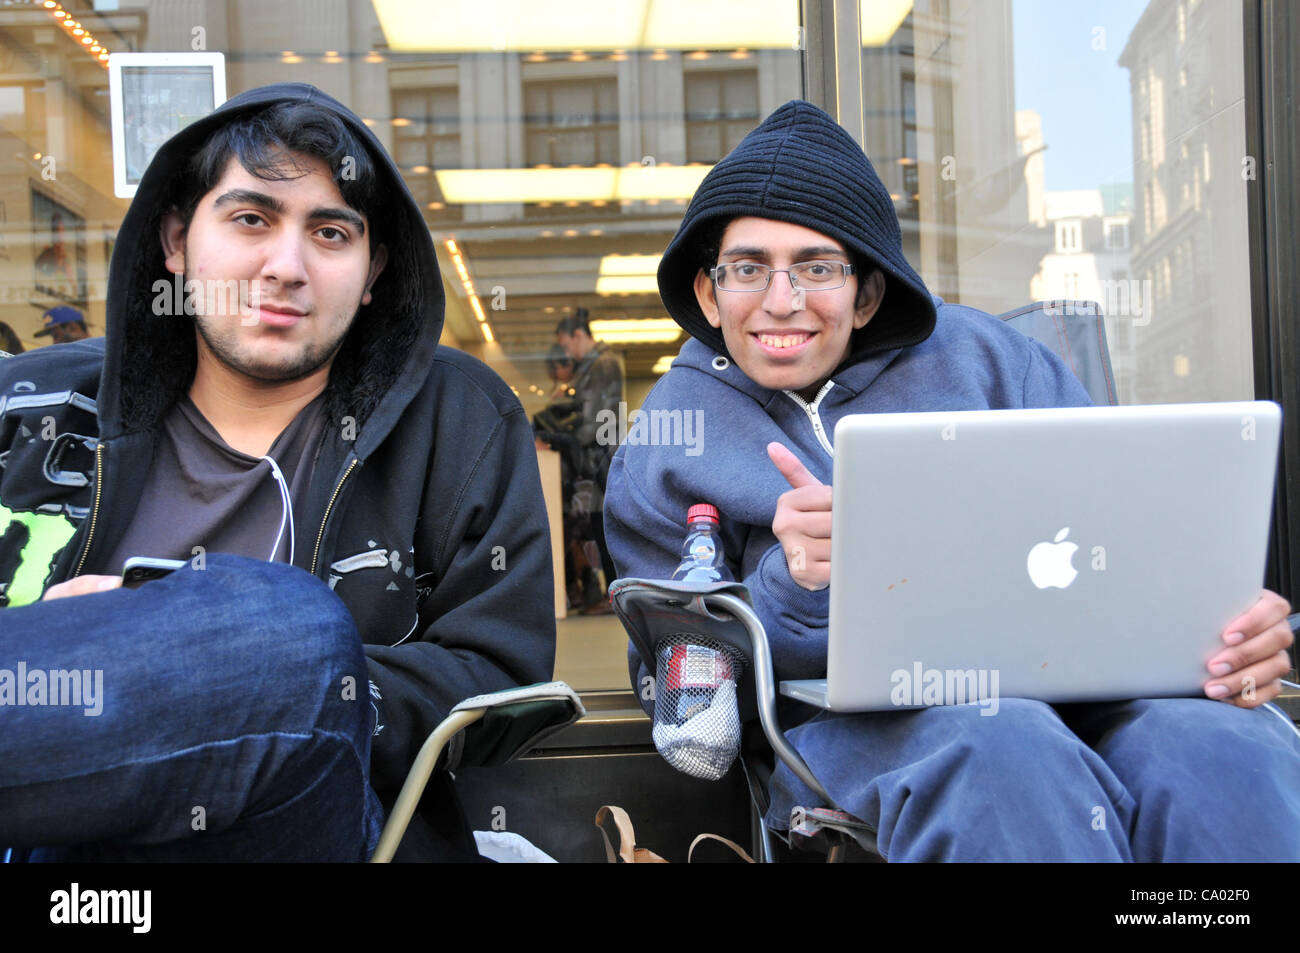 Regent Street London 11/3/12. The queue for iPad 3 starts nearly a week before its launch outside the Apple store on Regent Street. Zohaib is first in the queue [right] and his friend Ali [left]. Stock Photo